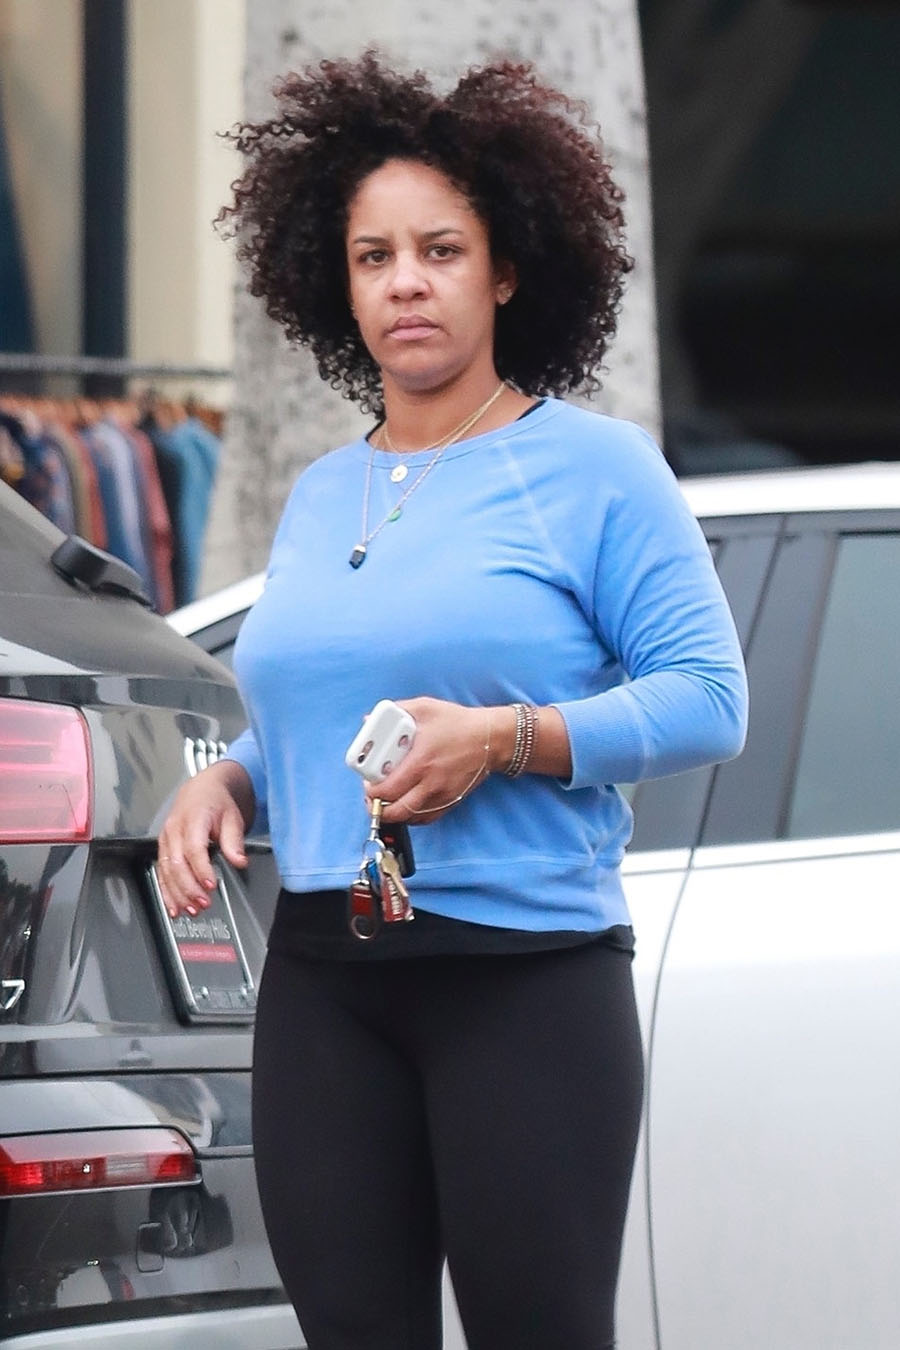 Jesse Williams’ ex-wife, Aryn Drake-Lee scored a a major victory in